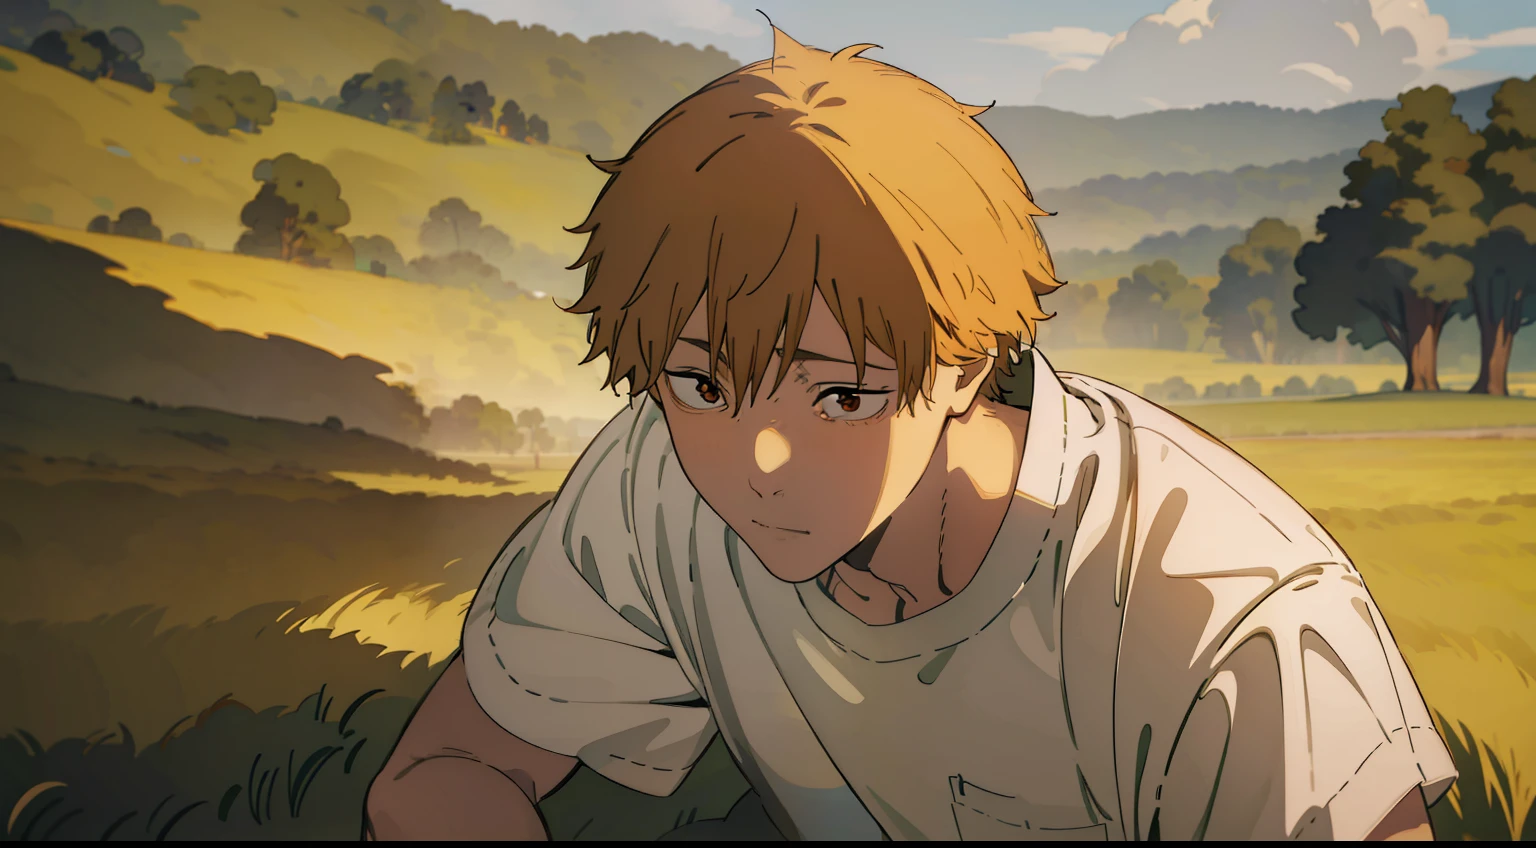 Denji stumbles upon a charming field while wearing a white shirt, brought to life through intricate and detailed illustration by the skilled artist Emily Wang. The illustration style combines elements of realism and fantasy, giving the scene a unique charm. The color palette is a blend of warm and cool tones, adding depth and dimension to the artwork. Denji's facial expression reflects a sense of awe and tranquility. The lighting casts long shadows, creating a sense of serenity and timelessness. --v 5 --stylize 1000